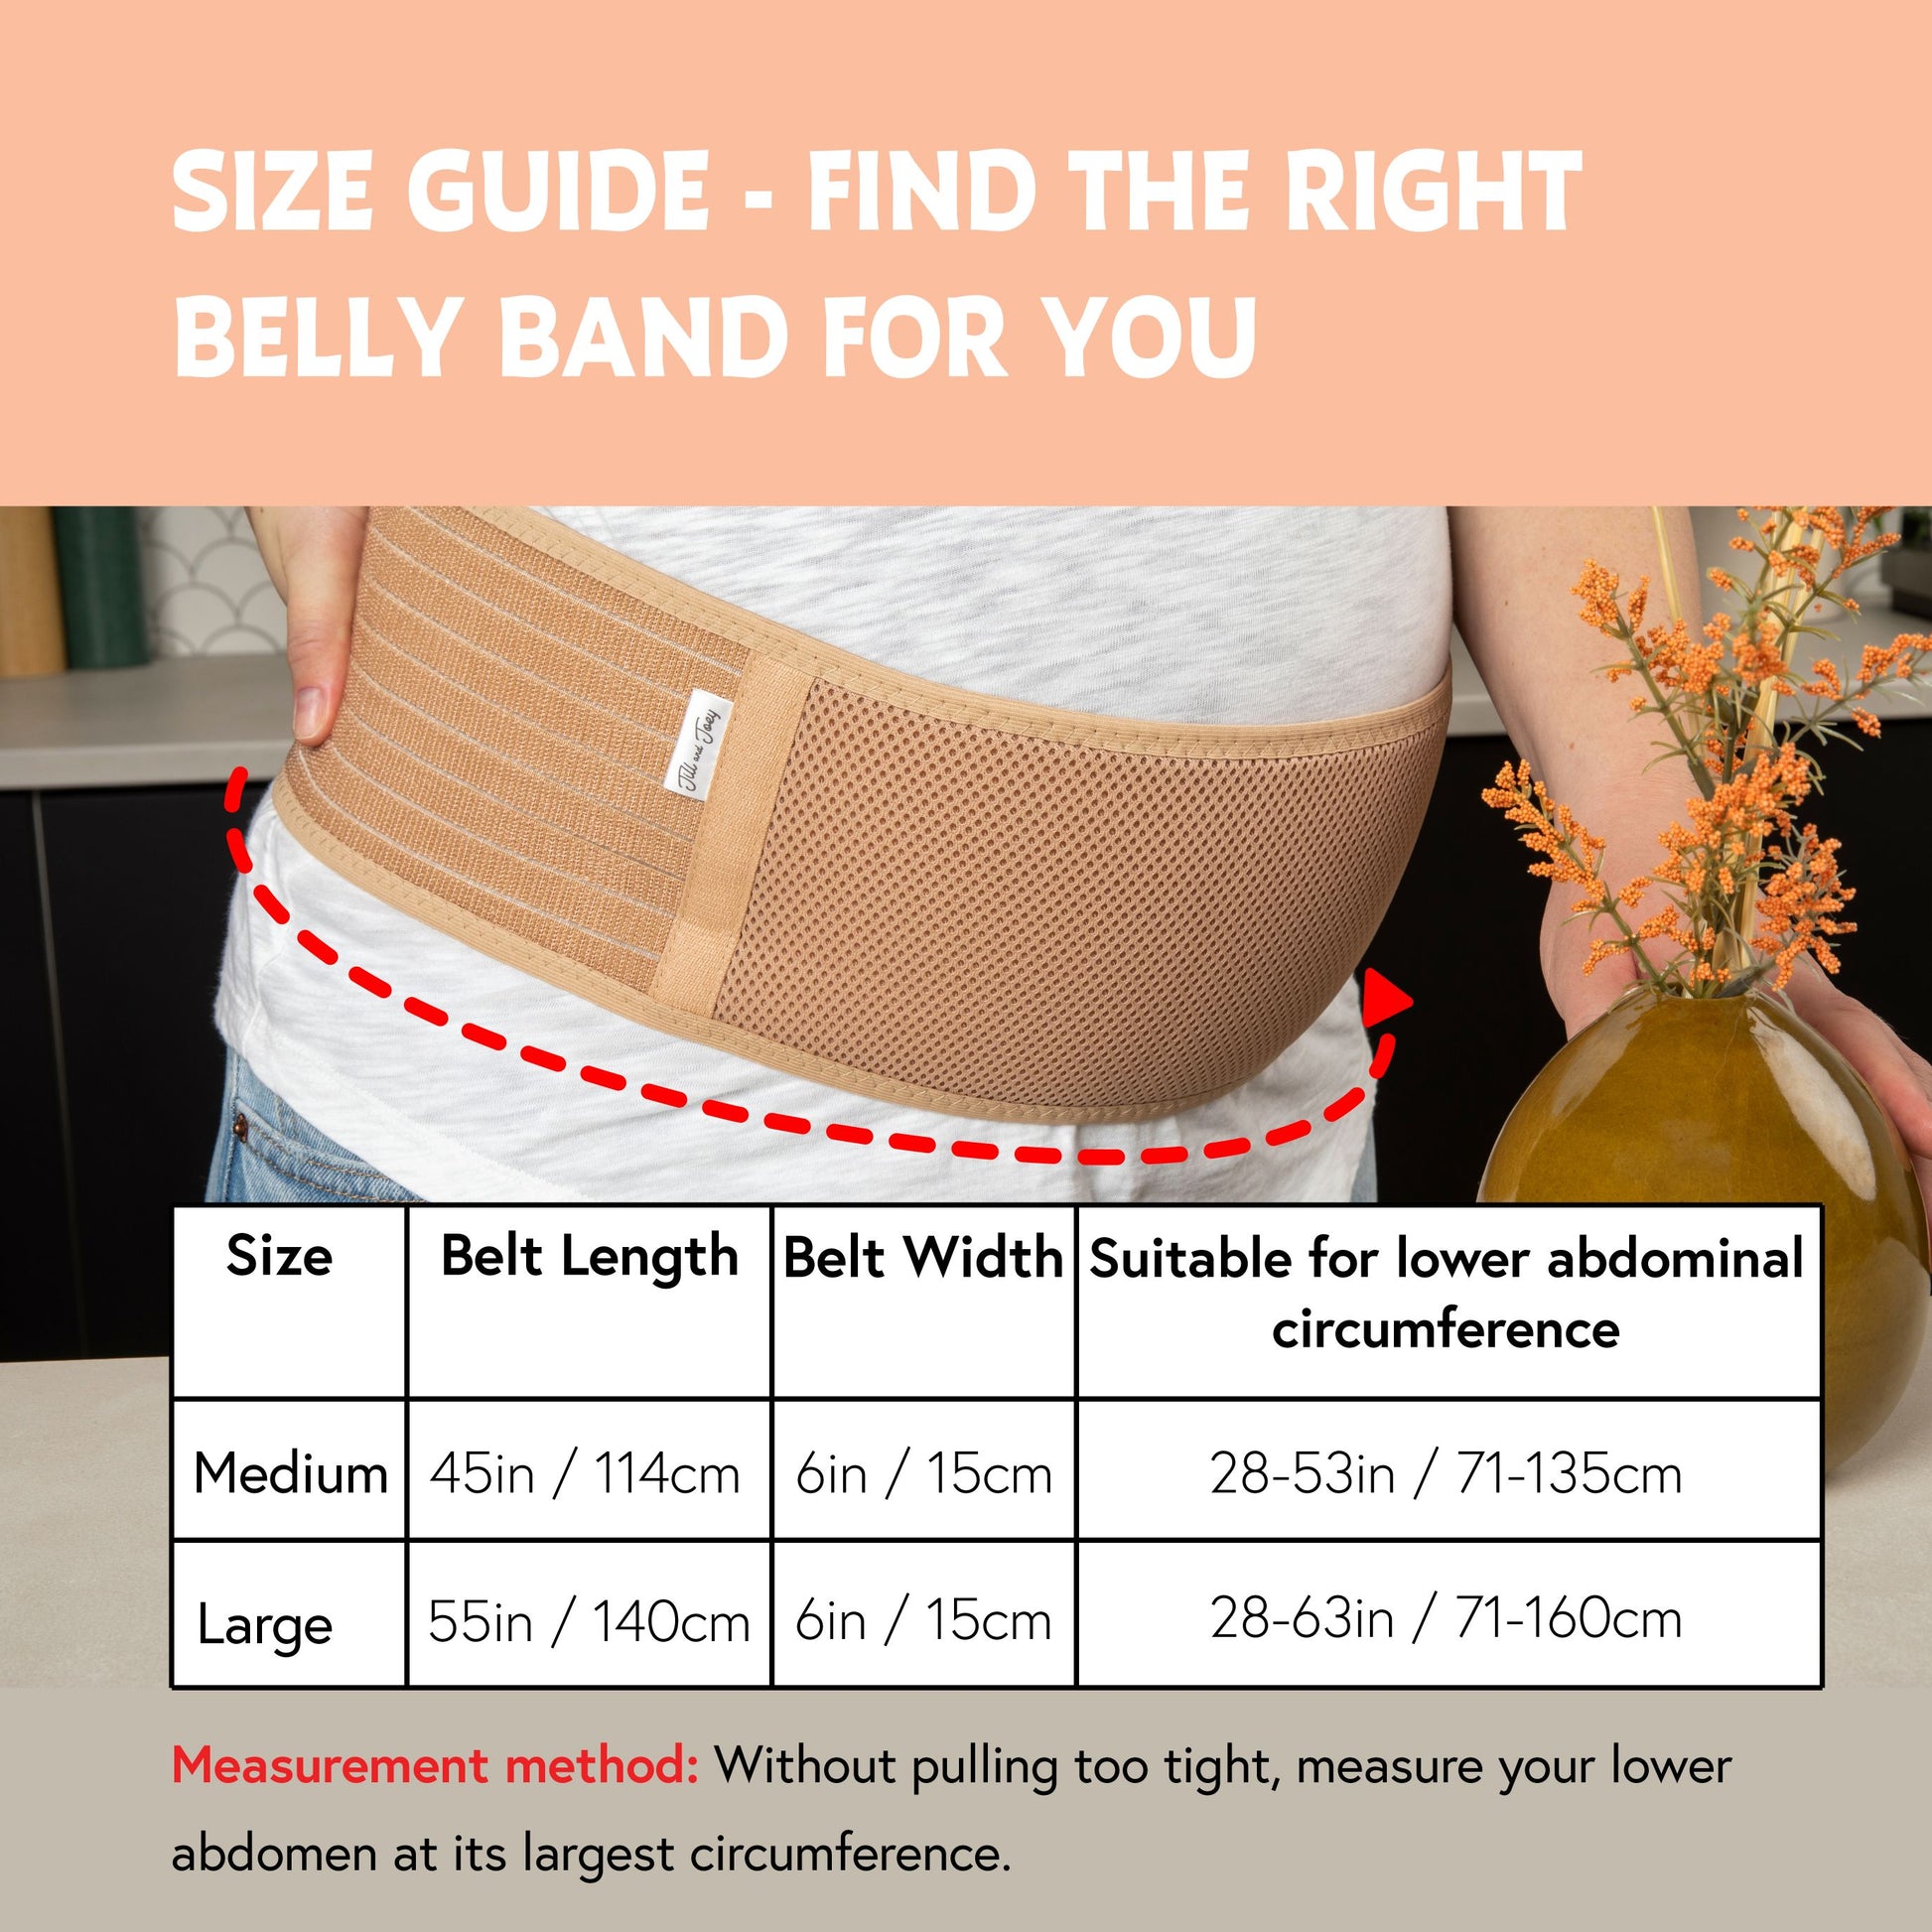 Which maternity belt is right for you?